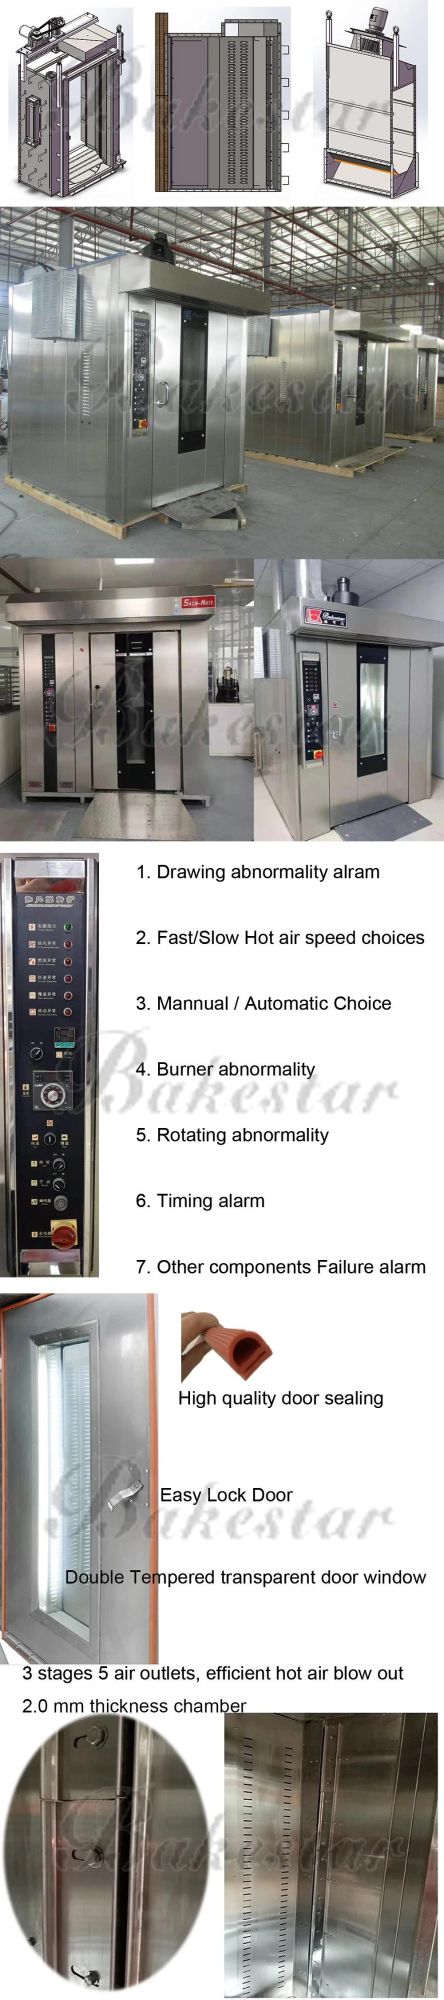 Hot Air Rotary Oven with Bakery Rack, Hot Wind 32 Trays Diesel Convection Rotary Oven Electrical